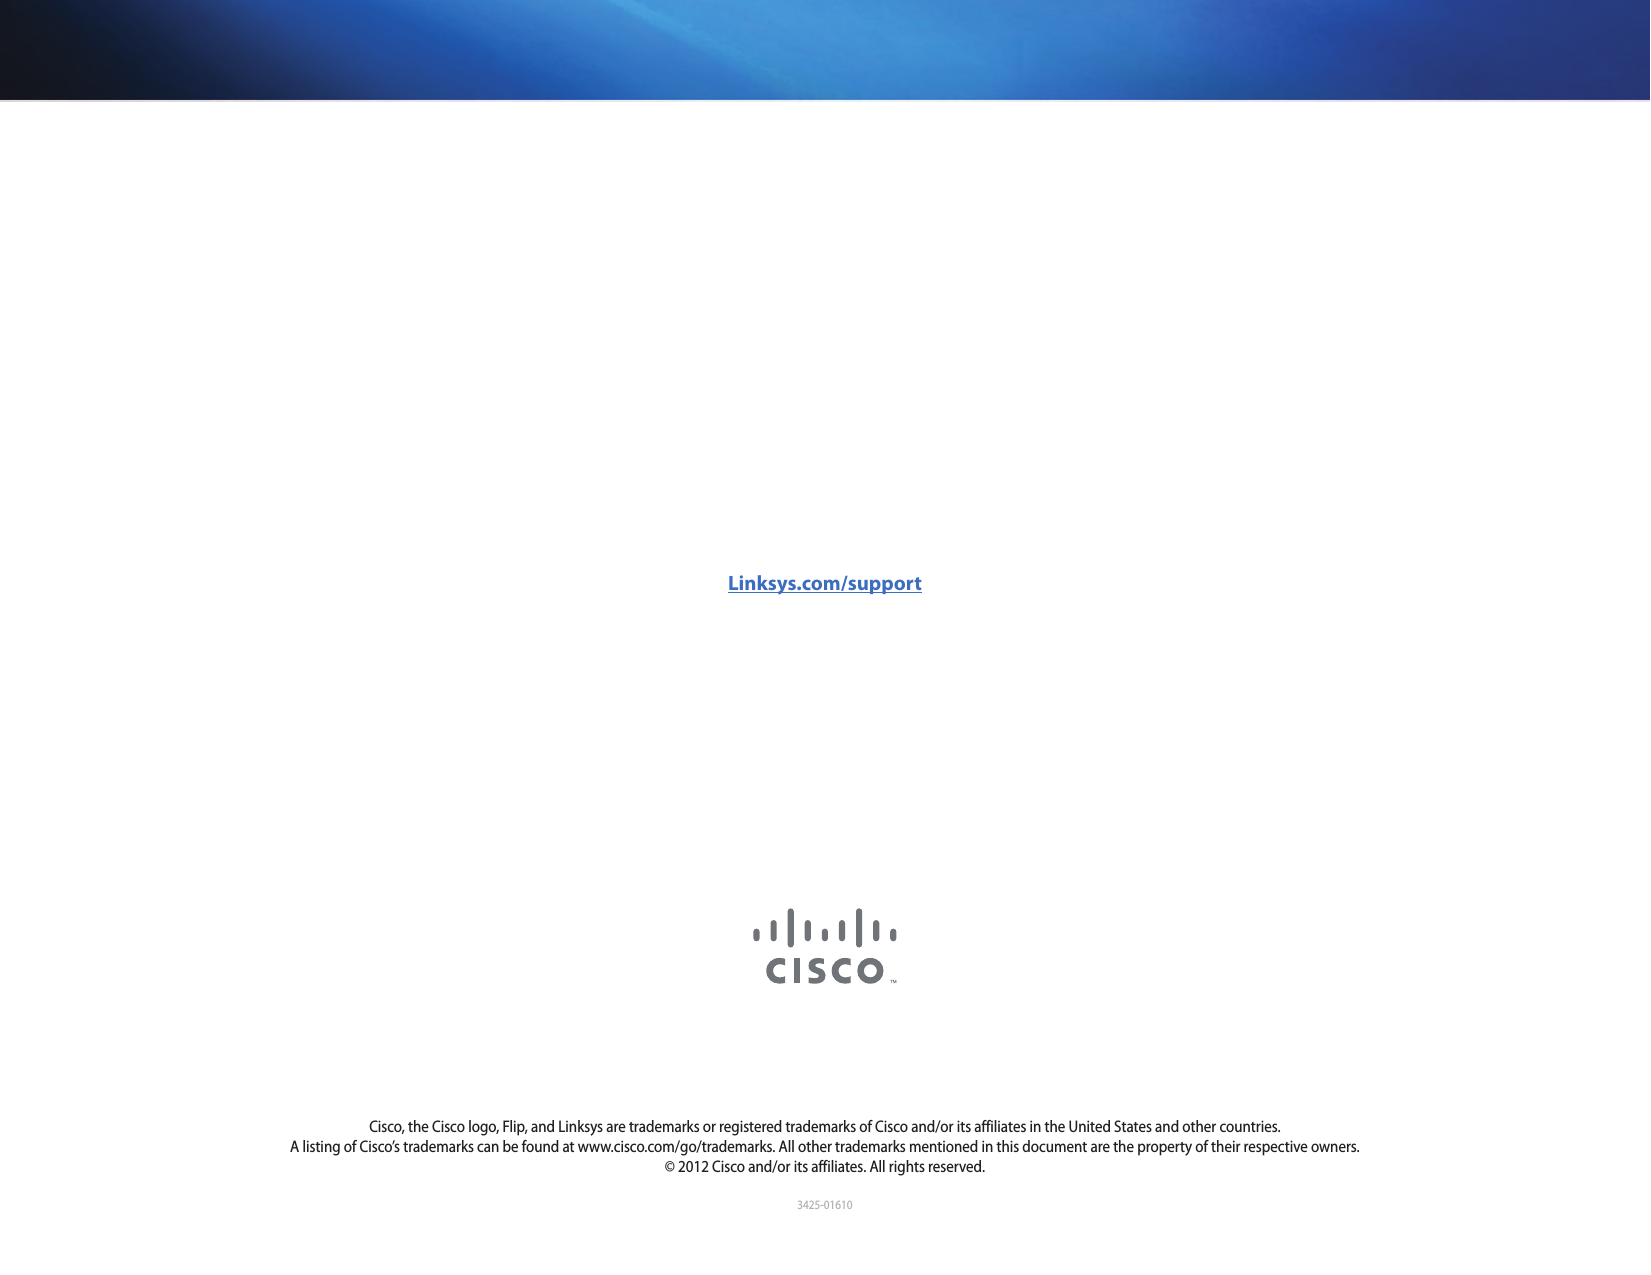 3425-01610Linksys.com/supportCisco, the Cisco logo, Flip, and Linksys are trademarks or registered trademarks of Cisco and/or its affiliates in the United States and other countries. A listing of Cisco’s trademarks can be found at www.cisco.com/go/trademarks. All other trademarks mentioned in this document are the property of their respective owners. © 2012 Cisco and/or its affiliates. All rights reserved.